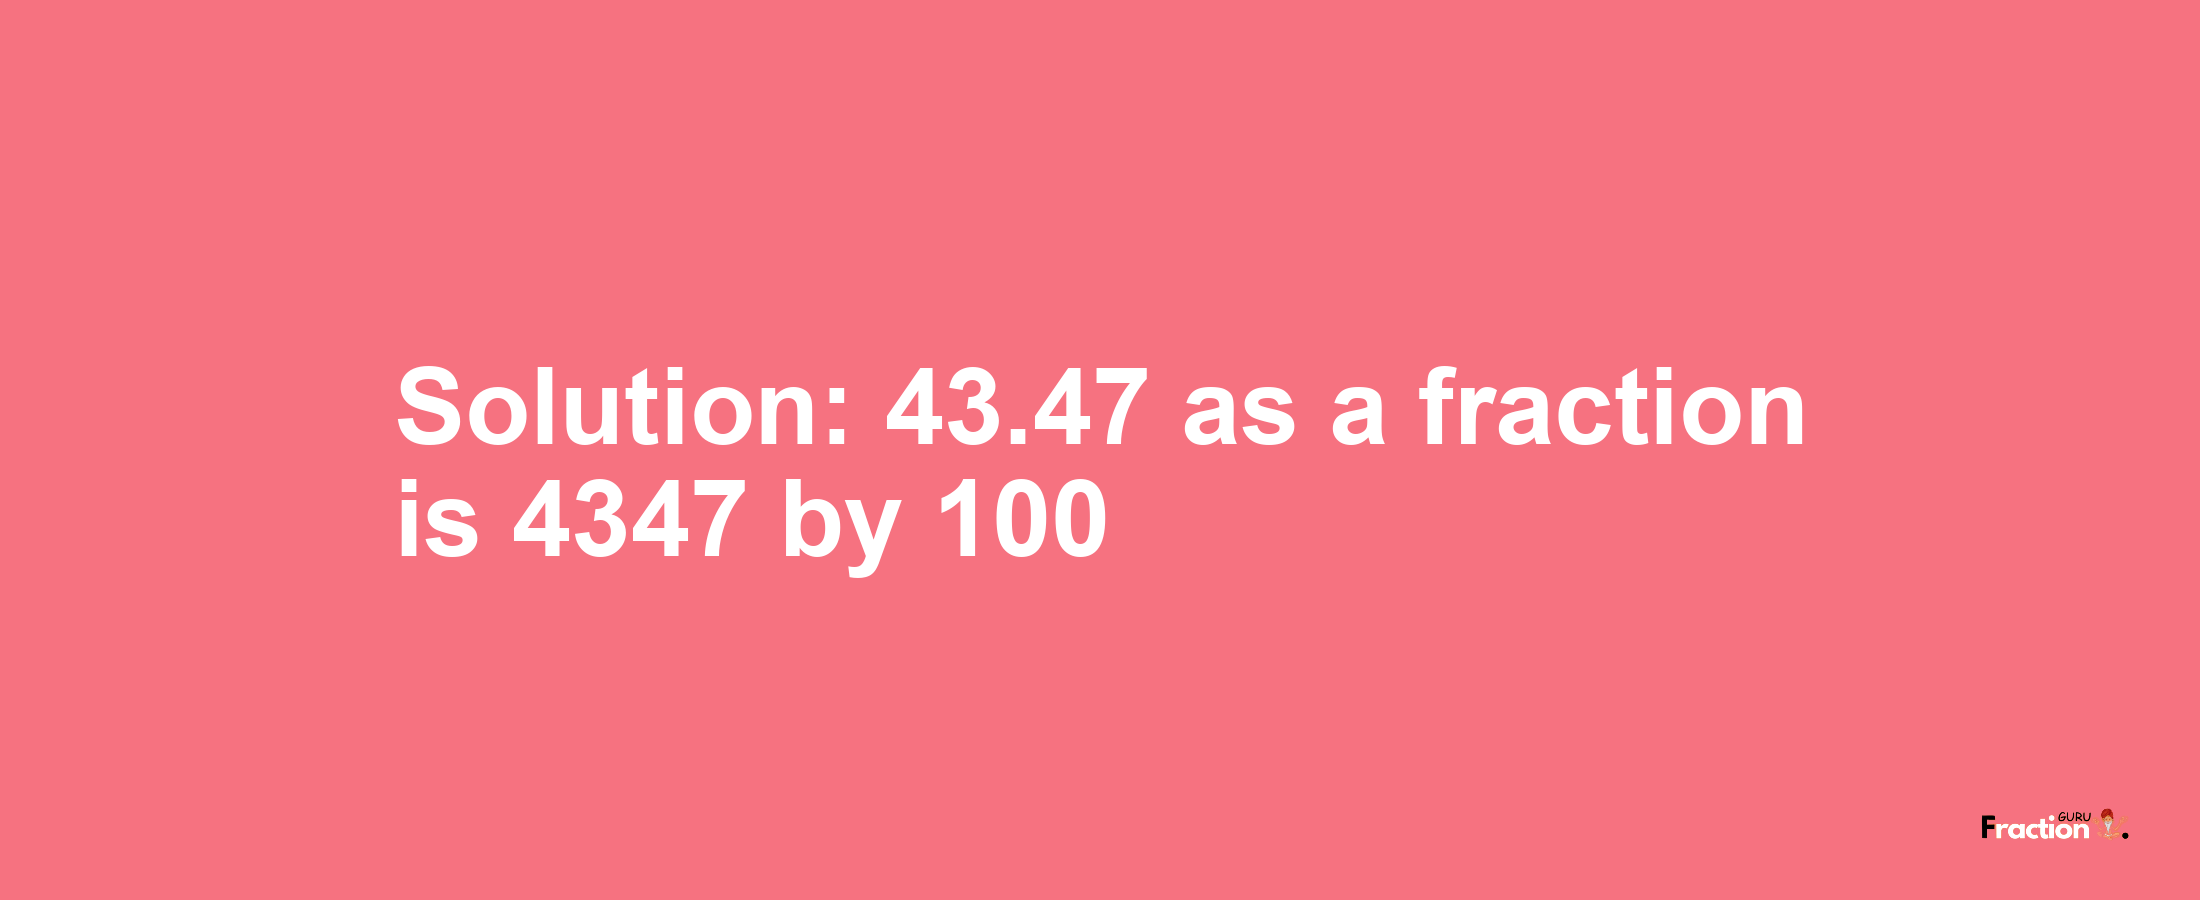 Solution:43.47 as a fraction is 4347/100